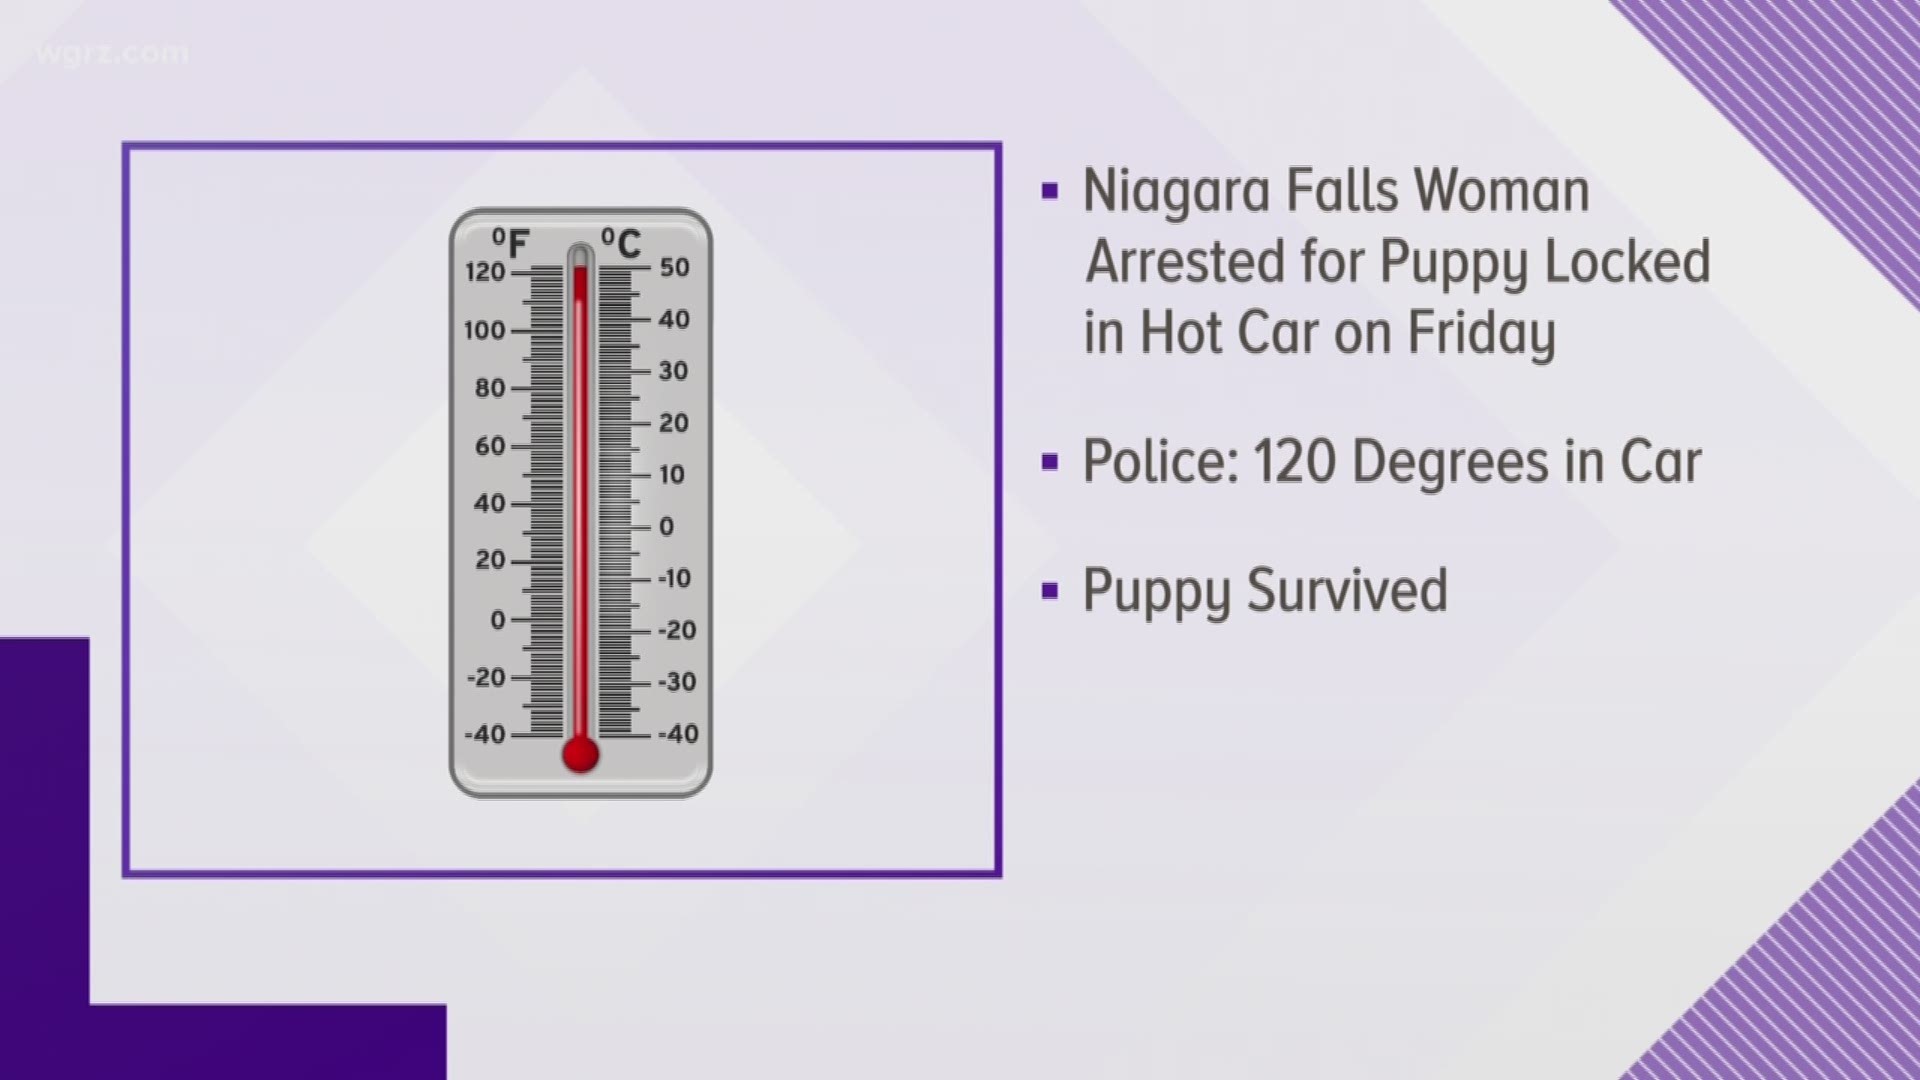 Falls woman arrested after puppy found in hot car